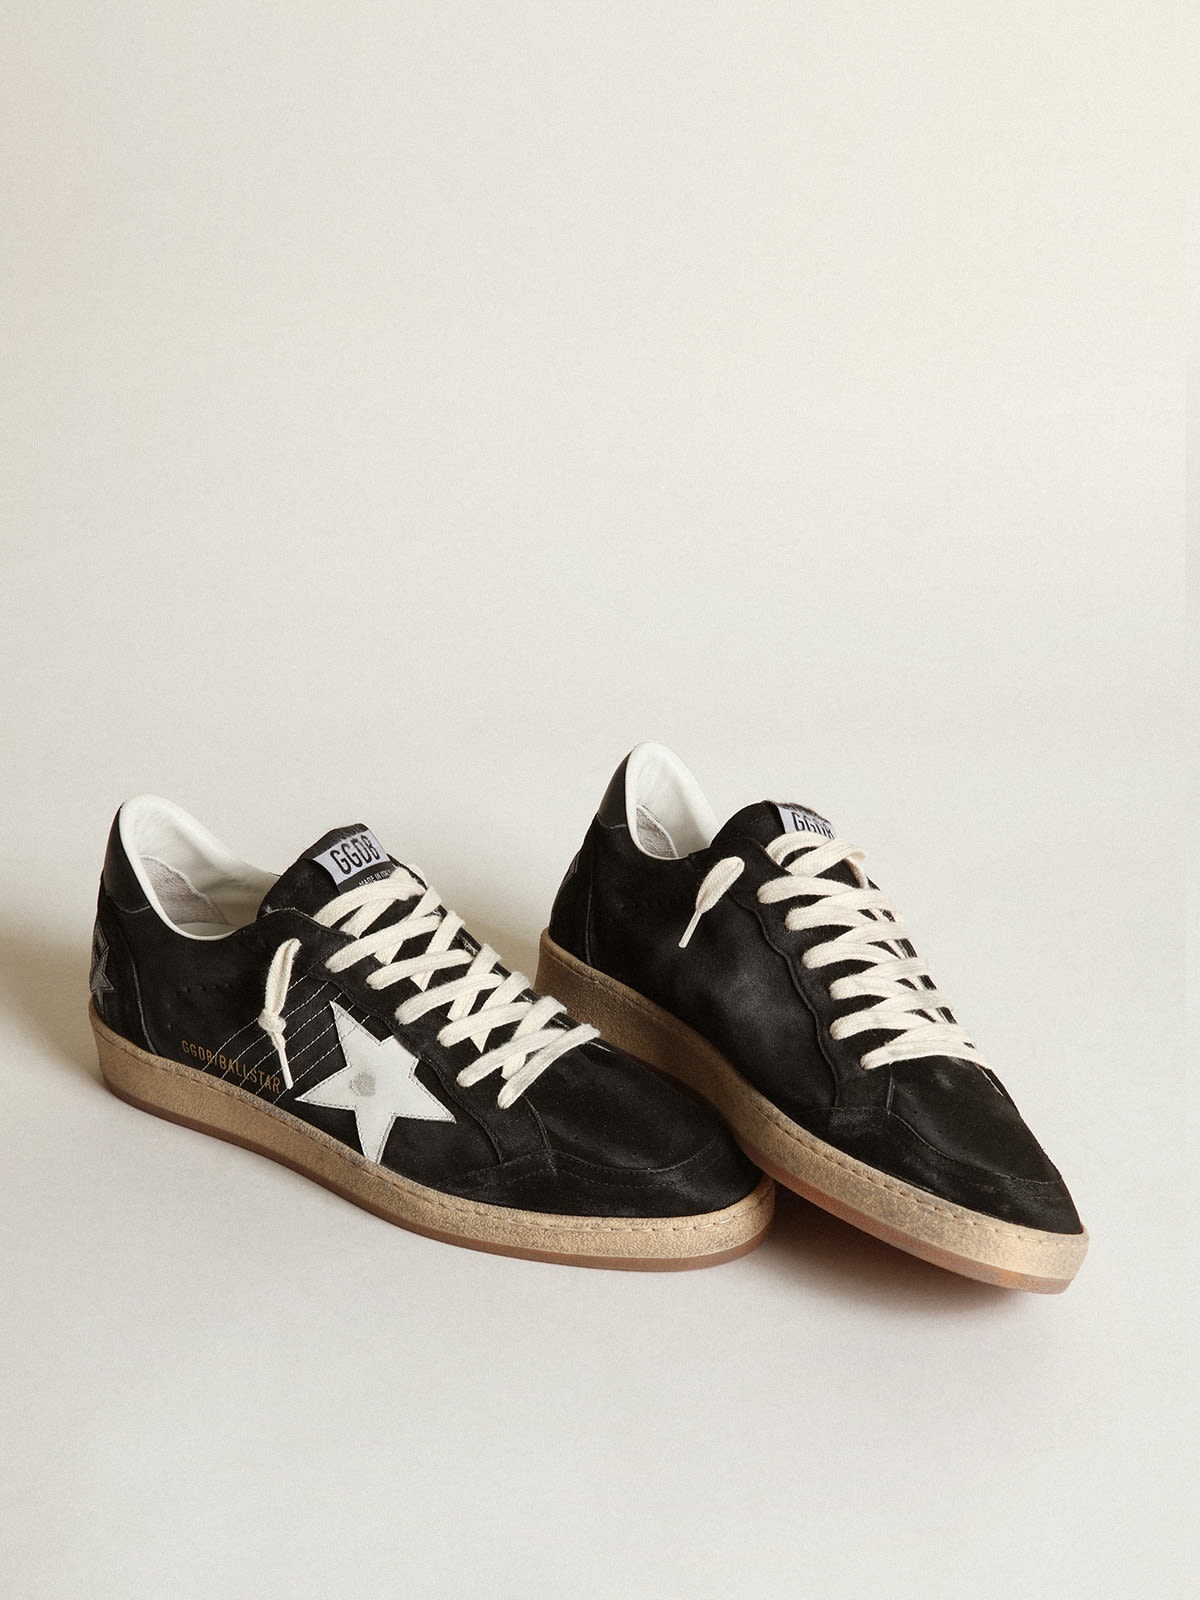 Women’s Ball Star sneakers in black suede with white leather star and black leather heel tab - 2